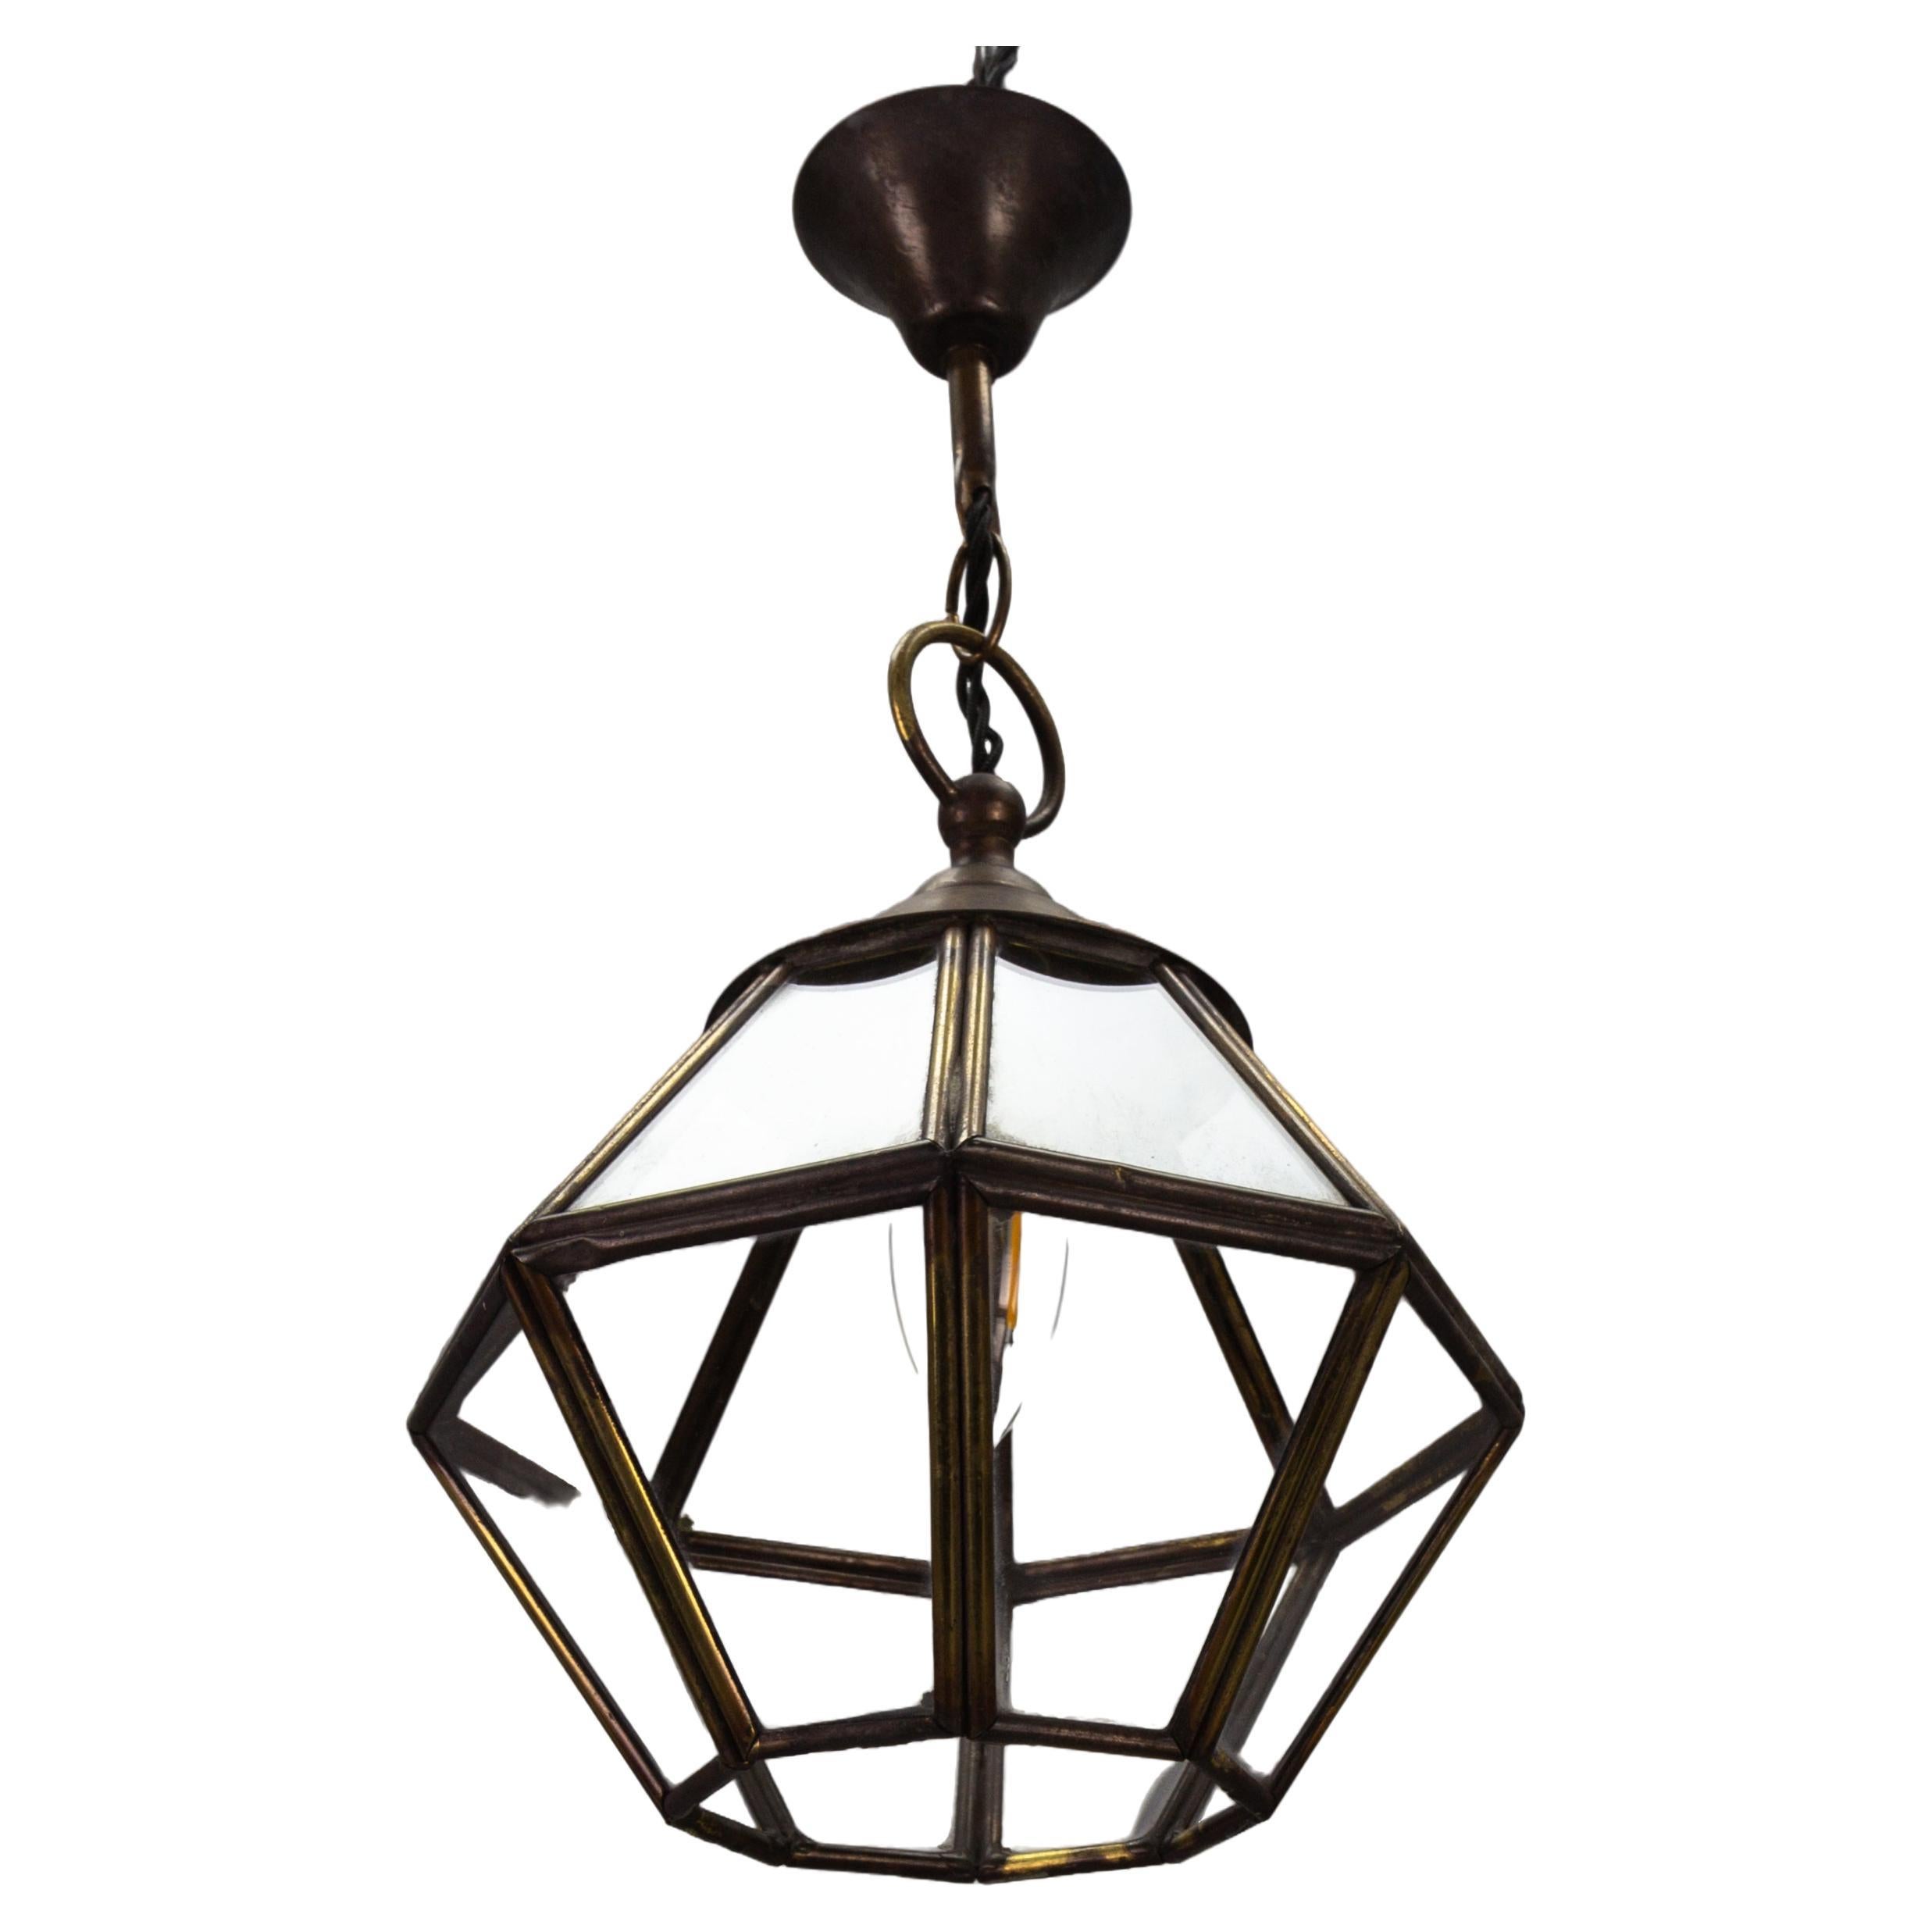 French Midcentury-Modern Brass and Clear Glass Octagonal Hanging Lantern For Sale